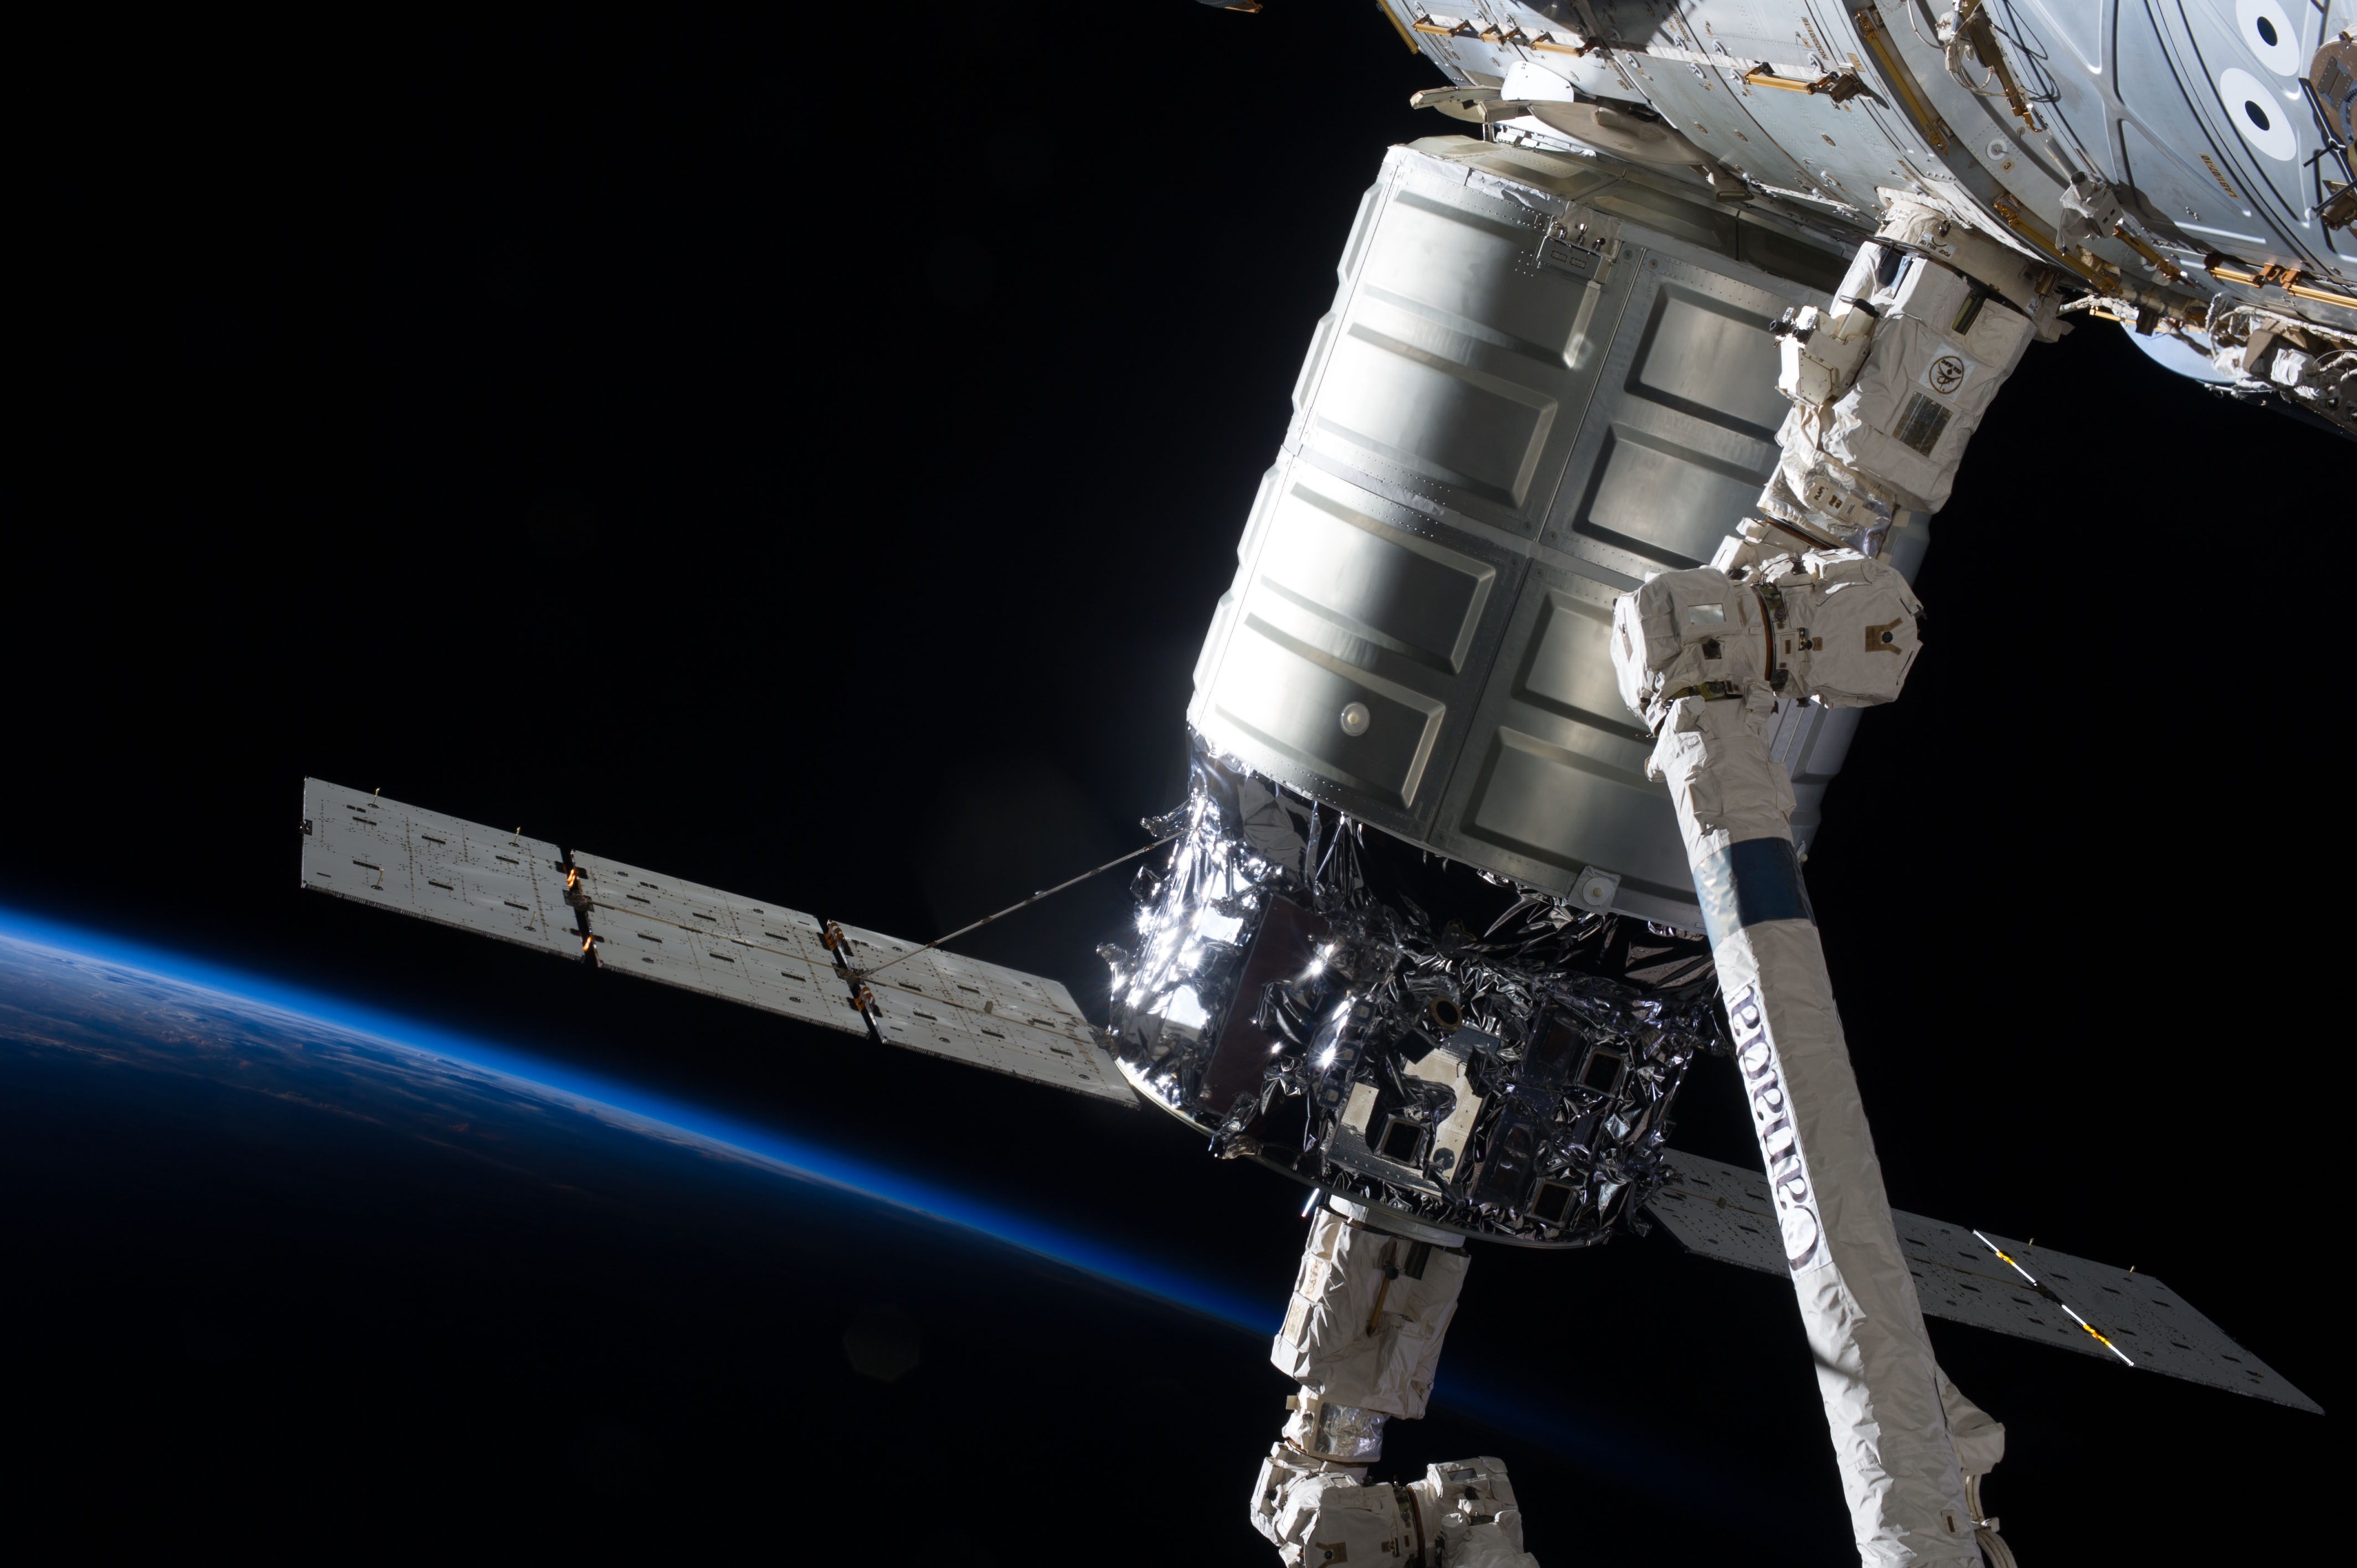 Based in design upon the Multi-Purpose Logistics Module (MPLM), carried aboard the shuttle for resupply purposes, Cygnus completed its first voyage in spectacular style. Photo Credit: NASA